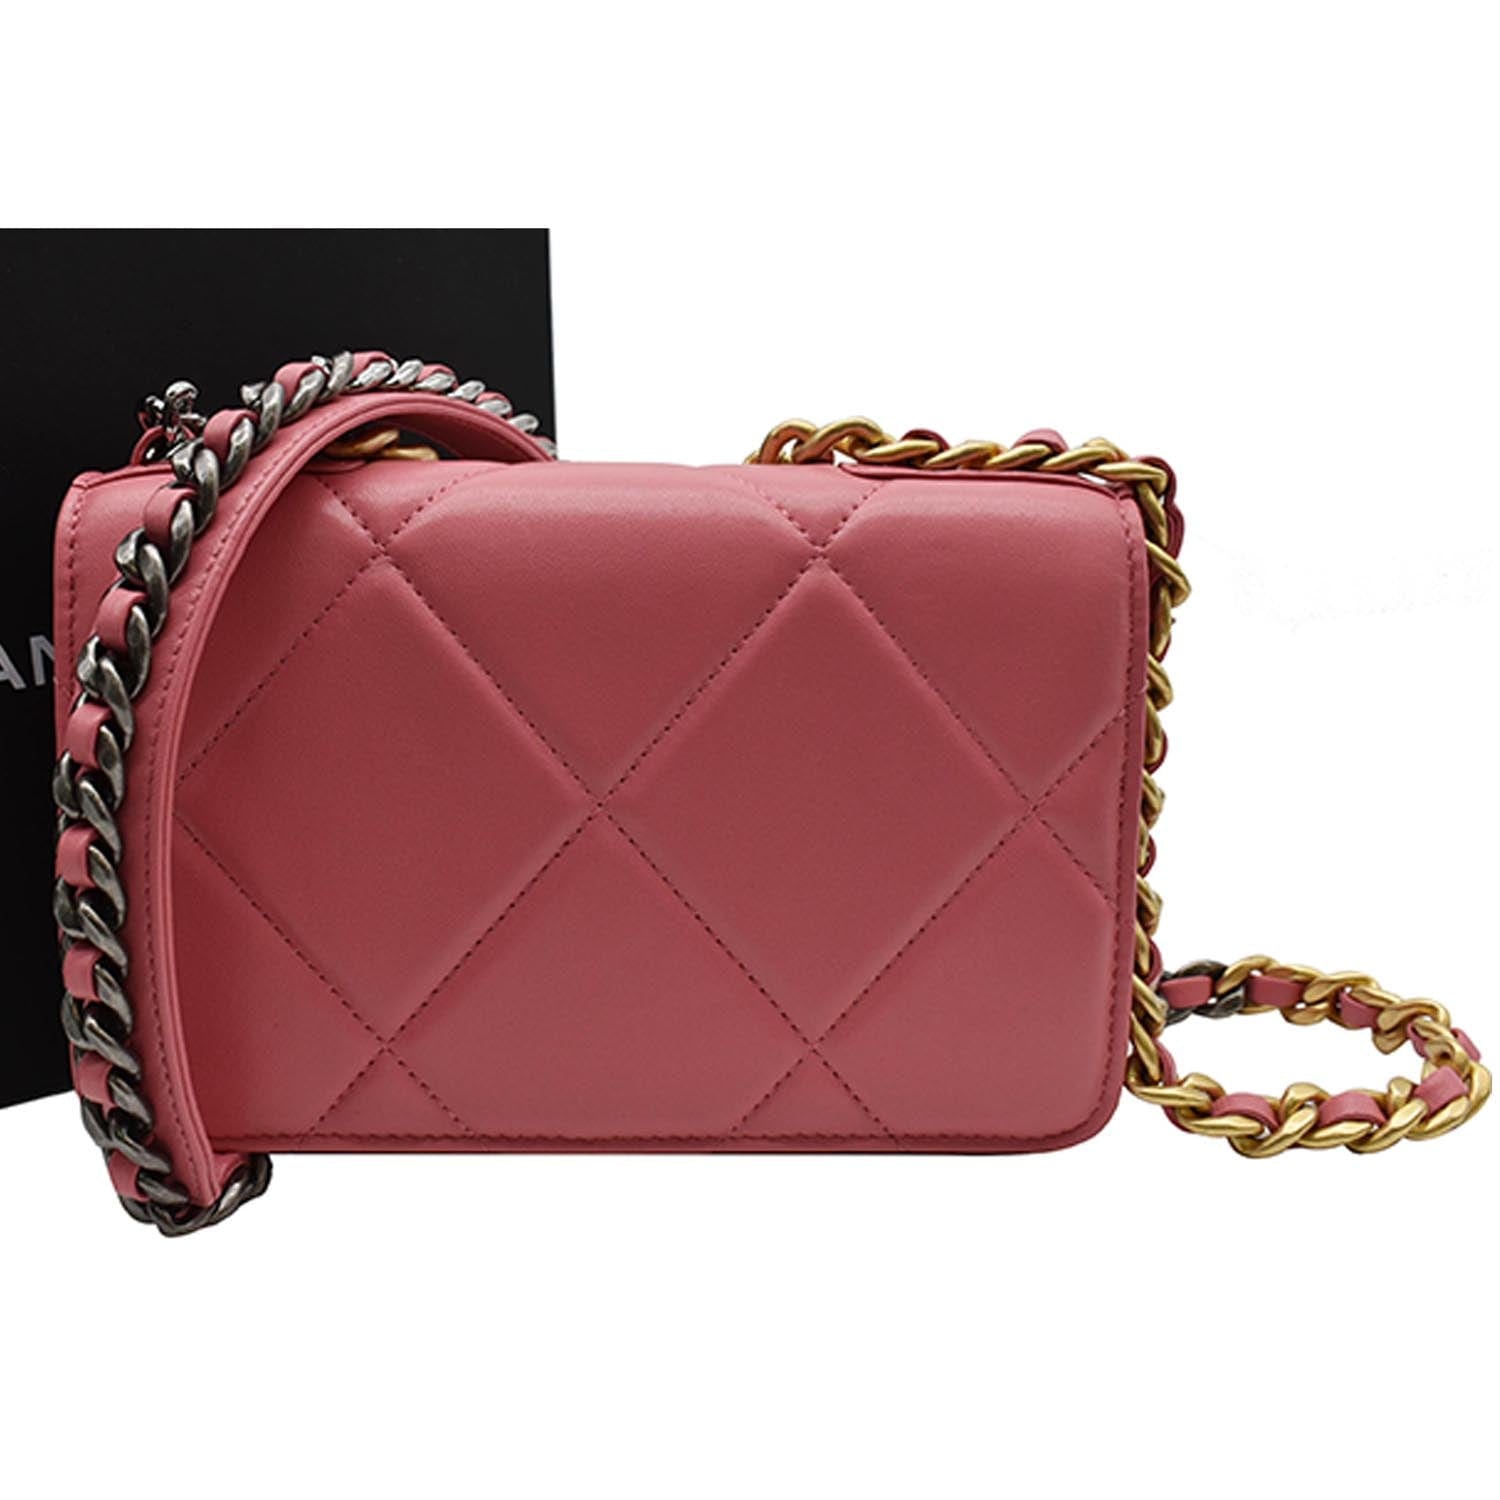 Chanel 19 Wallet on Chain Bag – Beccas Bags